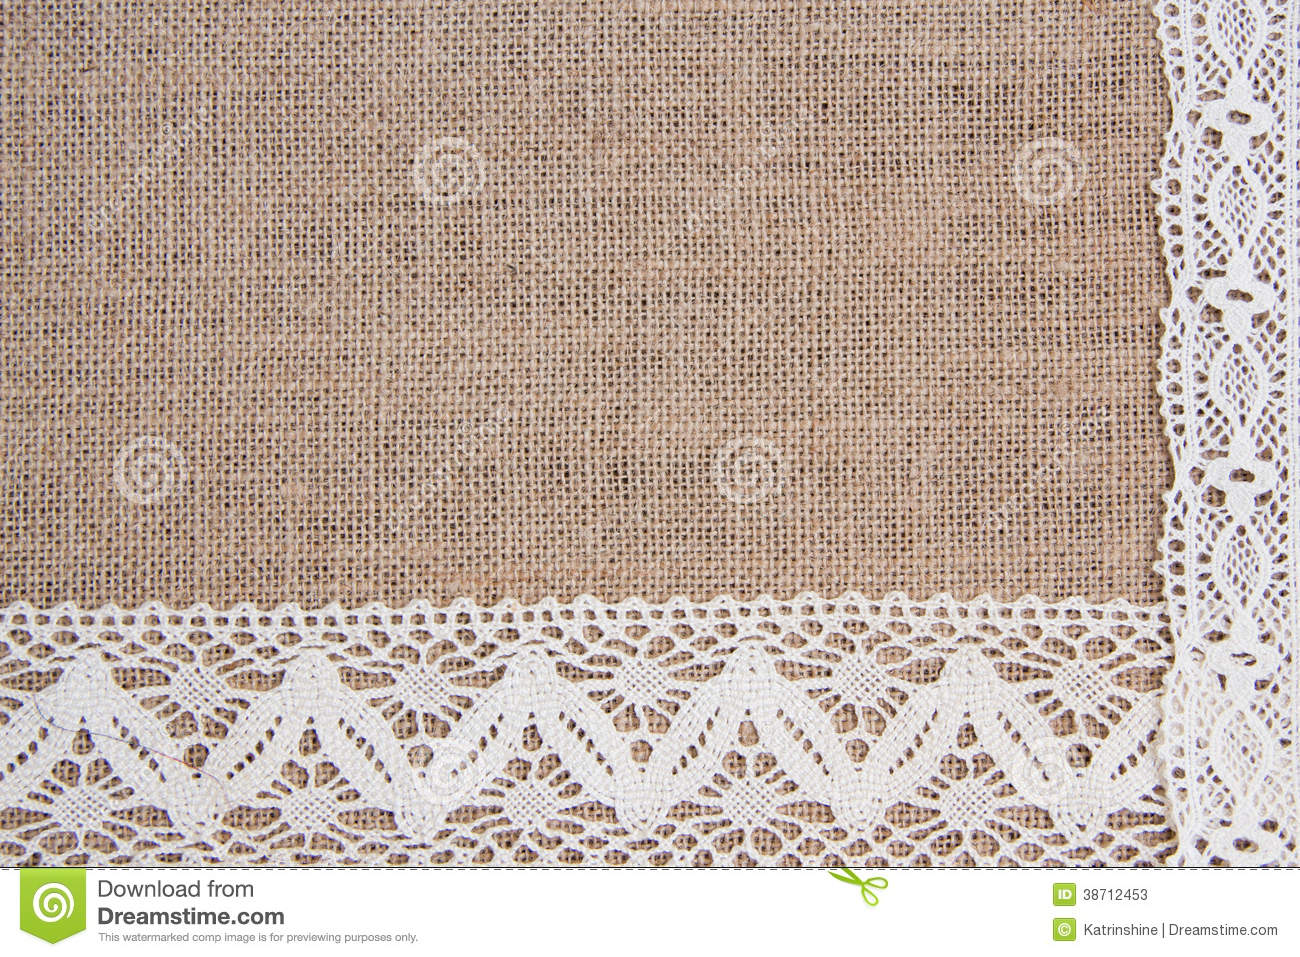 Burlap And Lace Background Image With